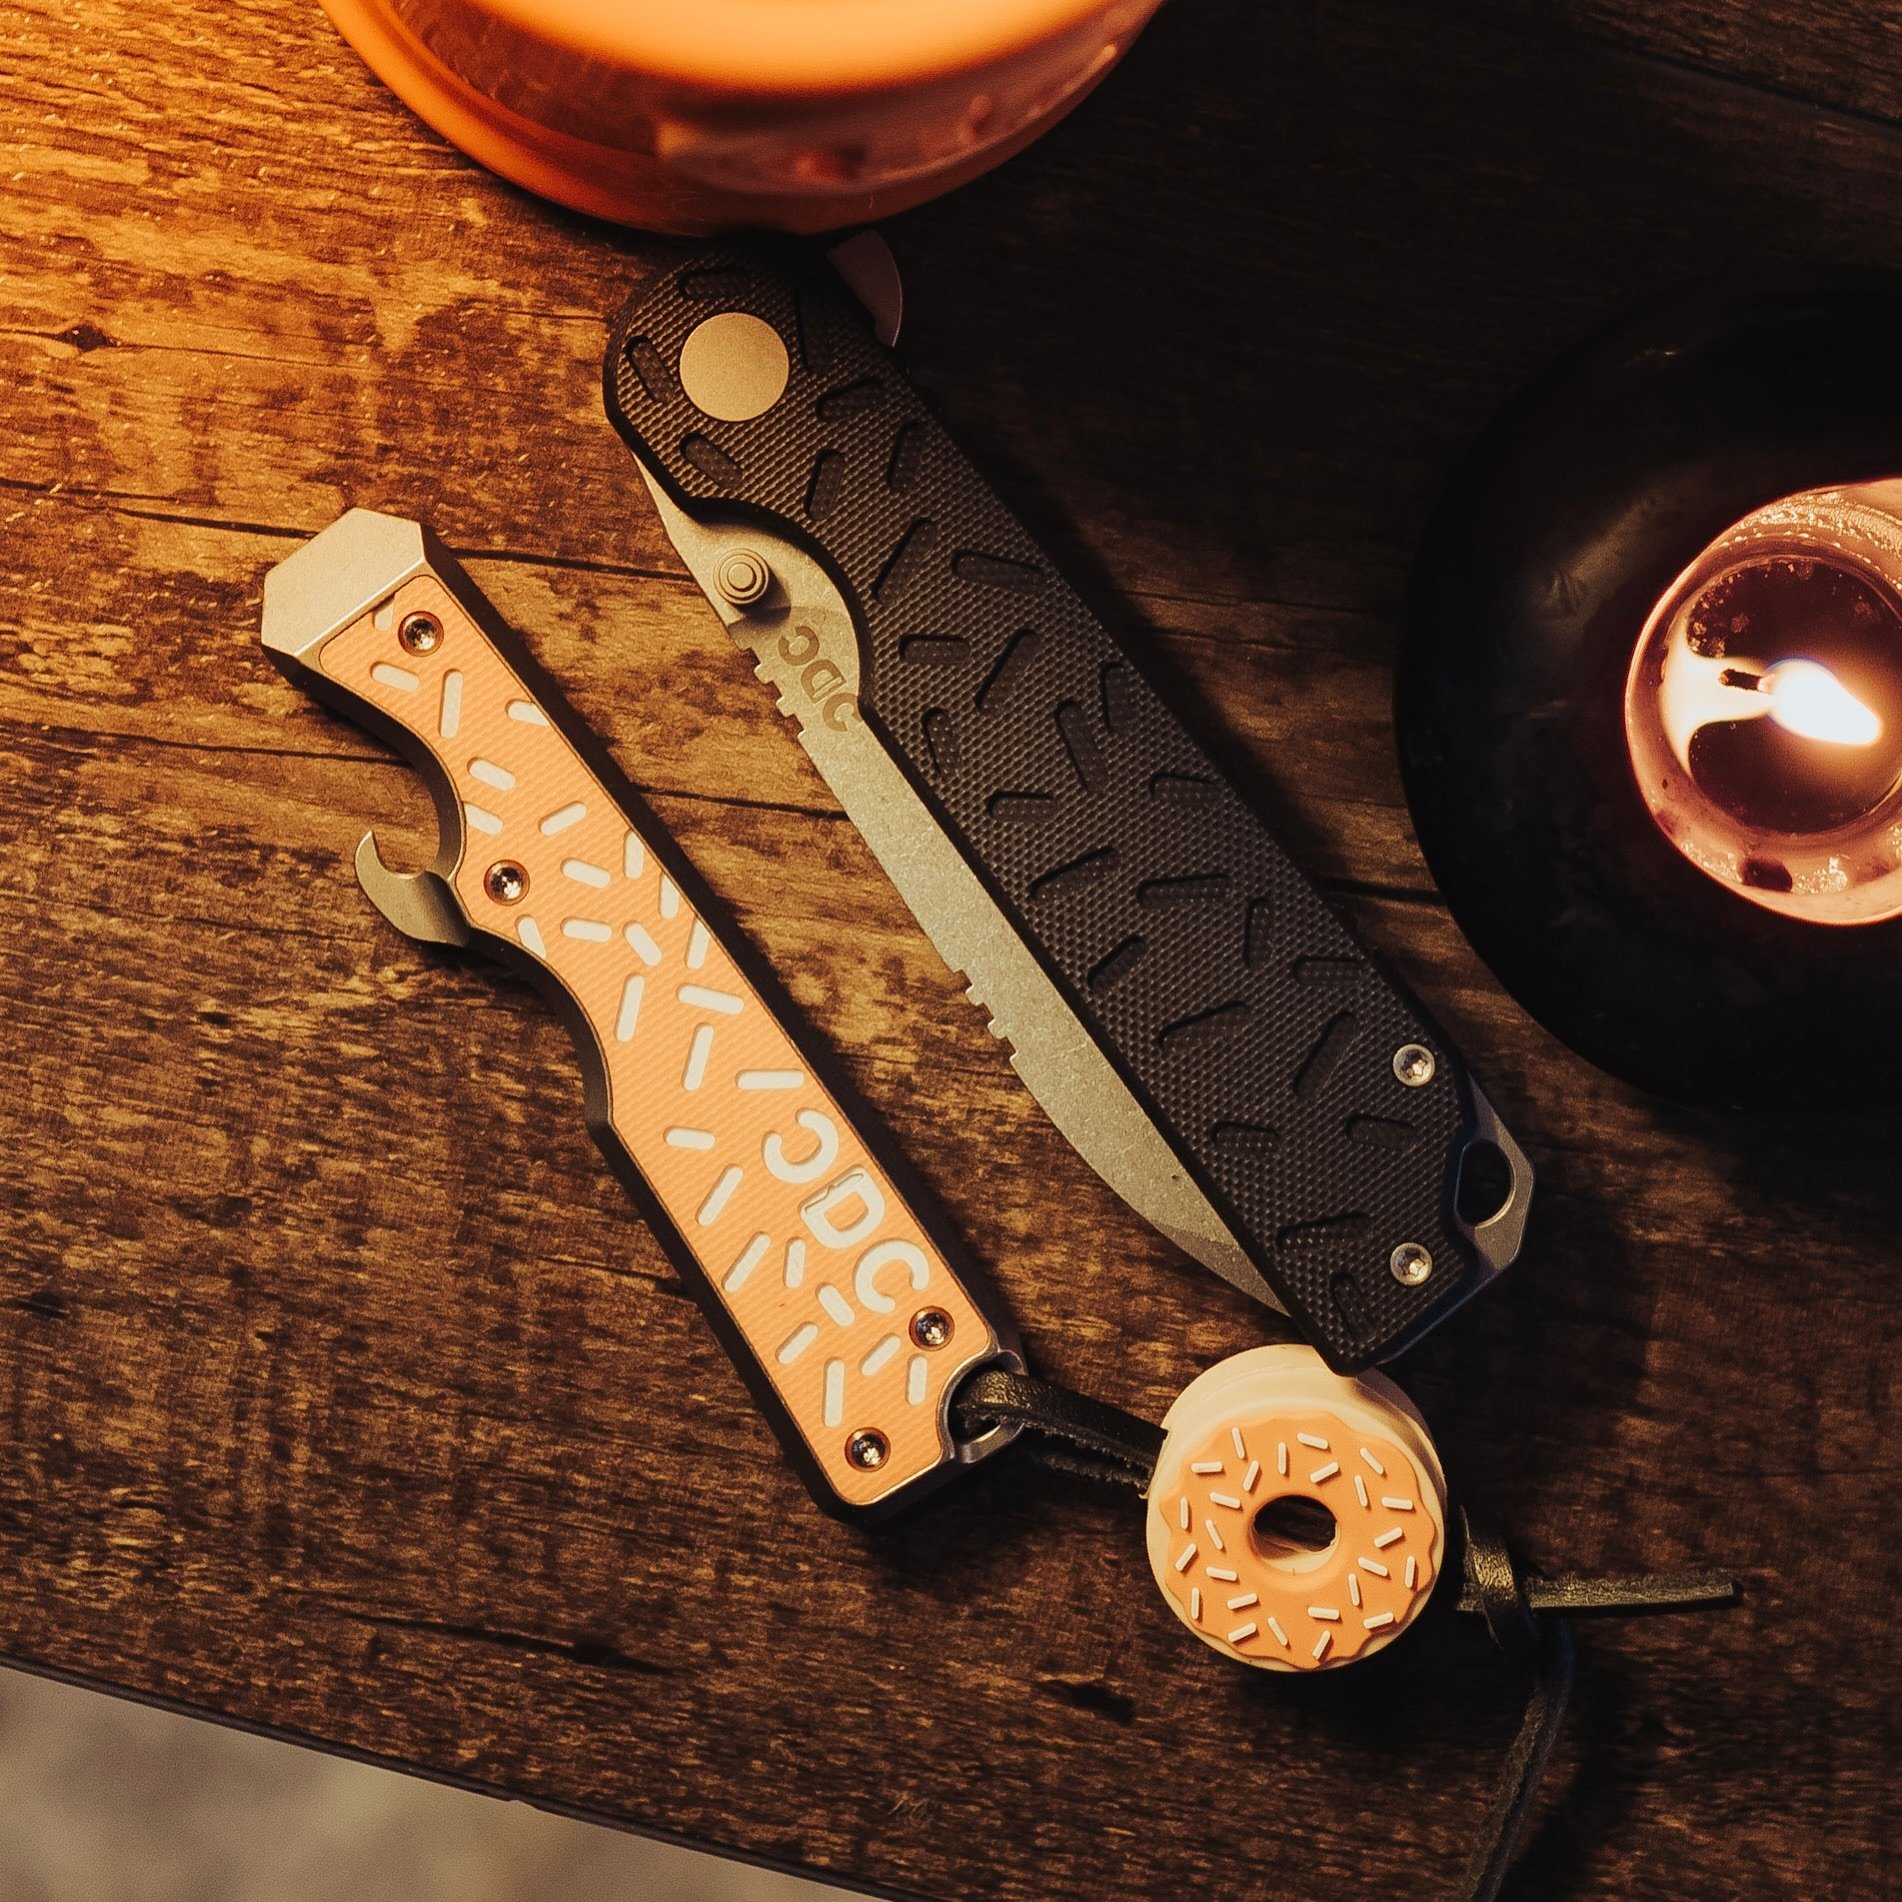 Something&rsquo;s got a hold on me&hellip;

www.DONUTKNIFE.com

#coffee #sweet #donut #donuts #donutknife #prybar #edc #cdc #cdcedc #morning #everydaycarry #fun 

📸: @barbarianbraunny